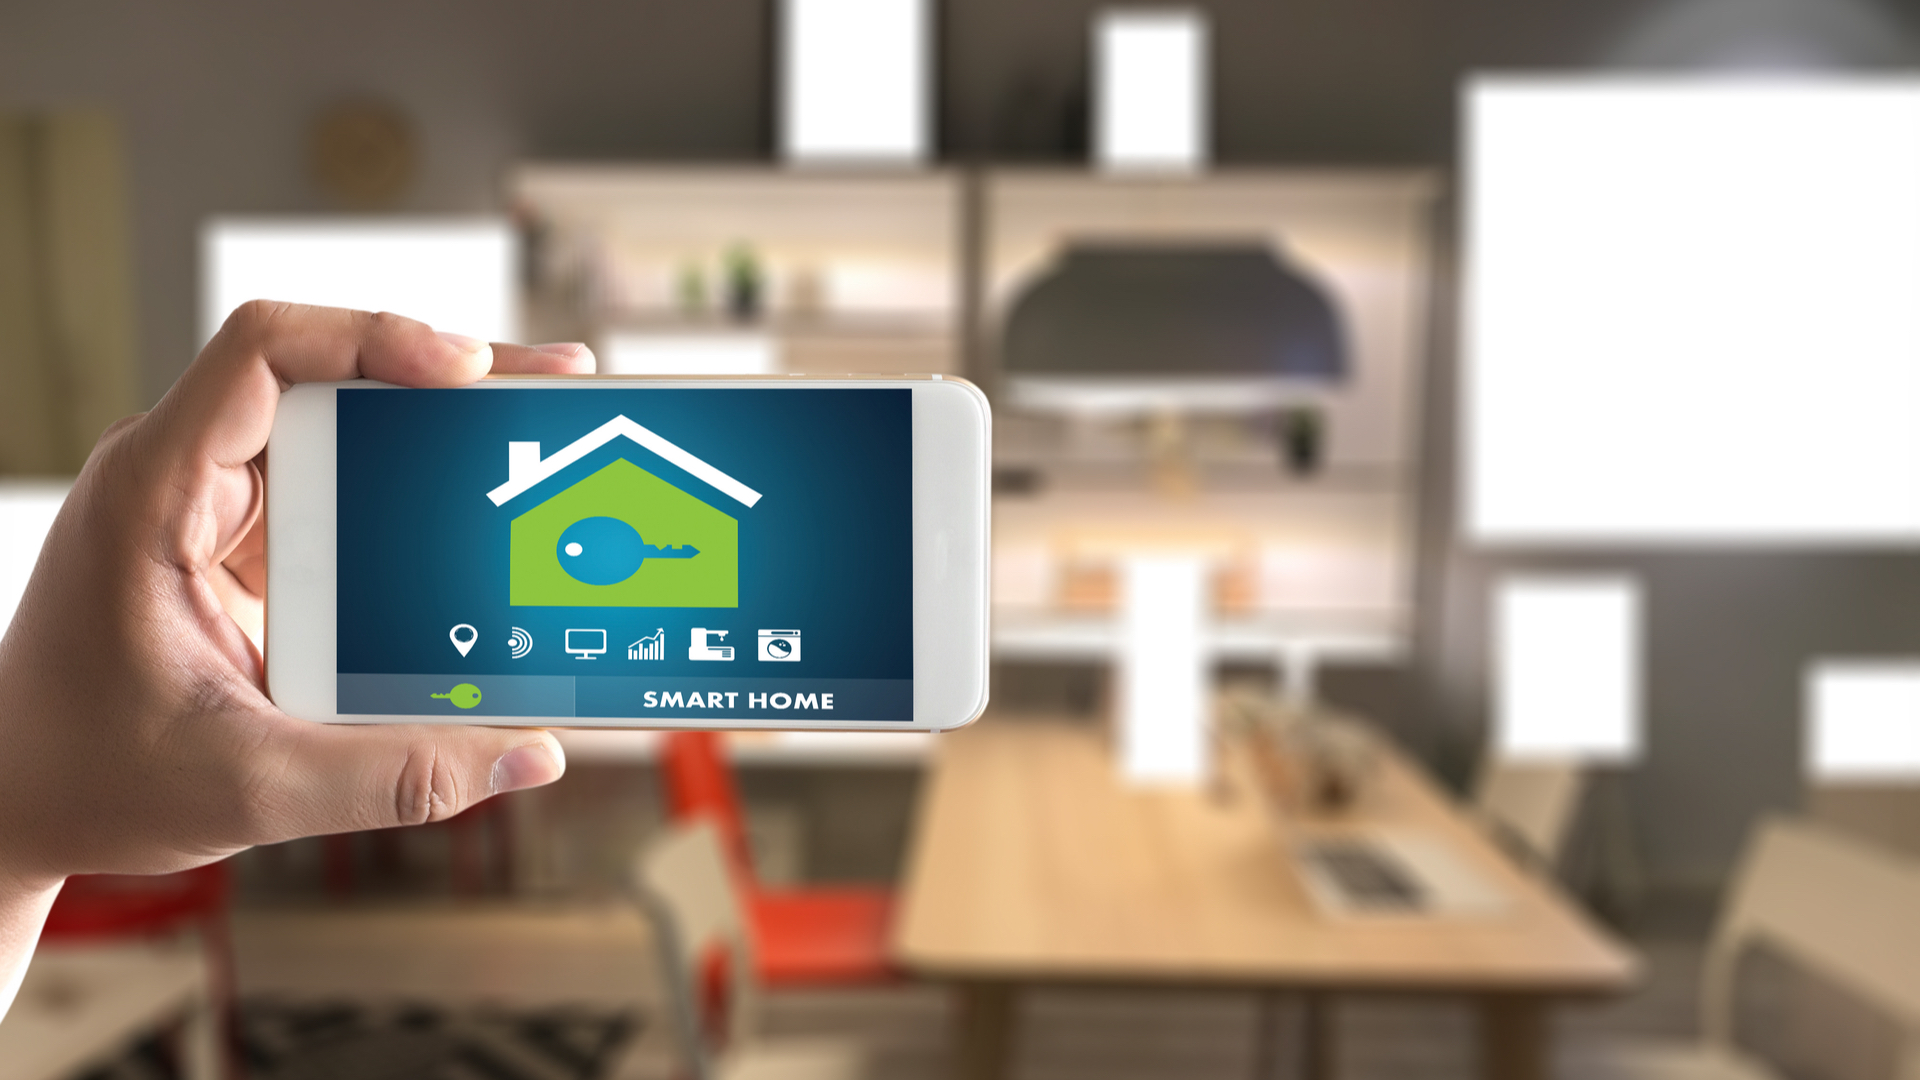 Home Wi-Fi QoE: Post-AI Hype Connected Home Management - ASSIA